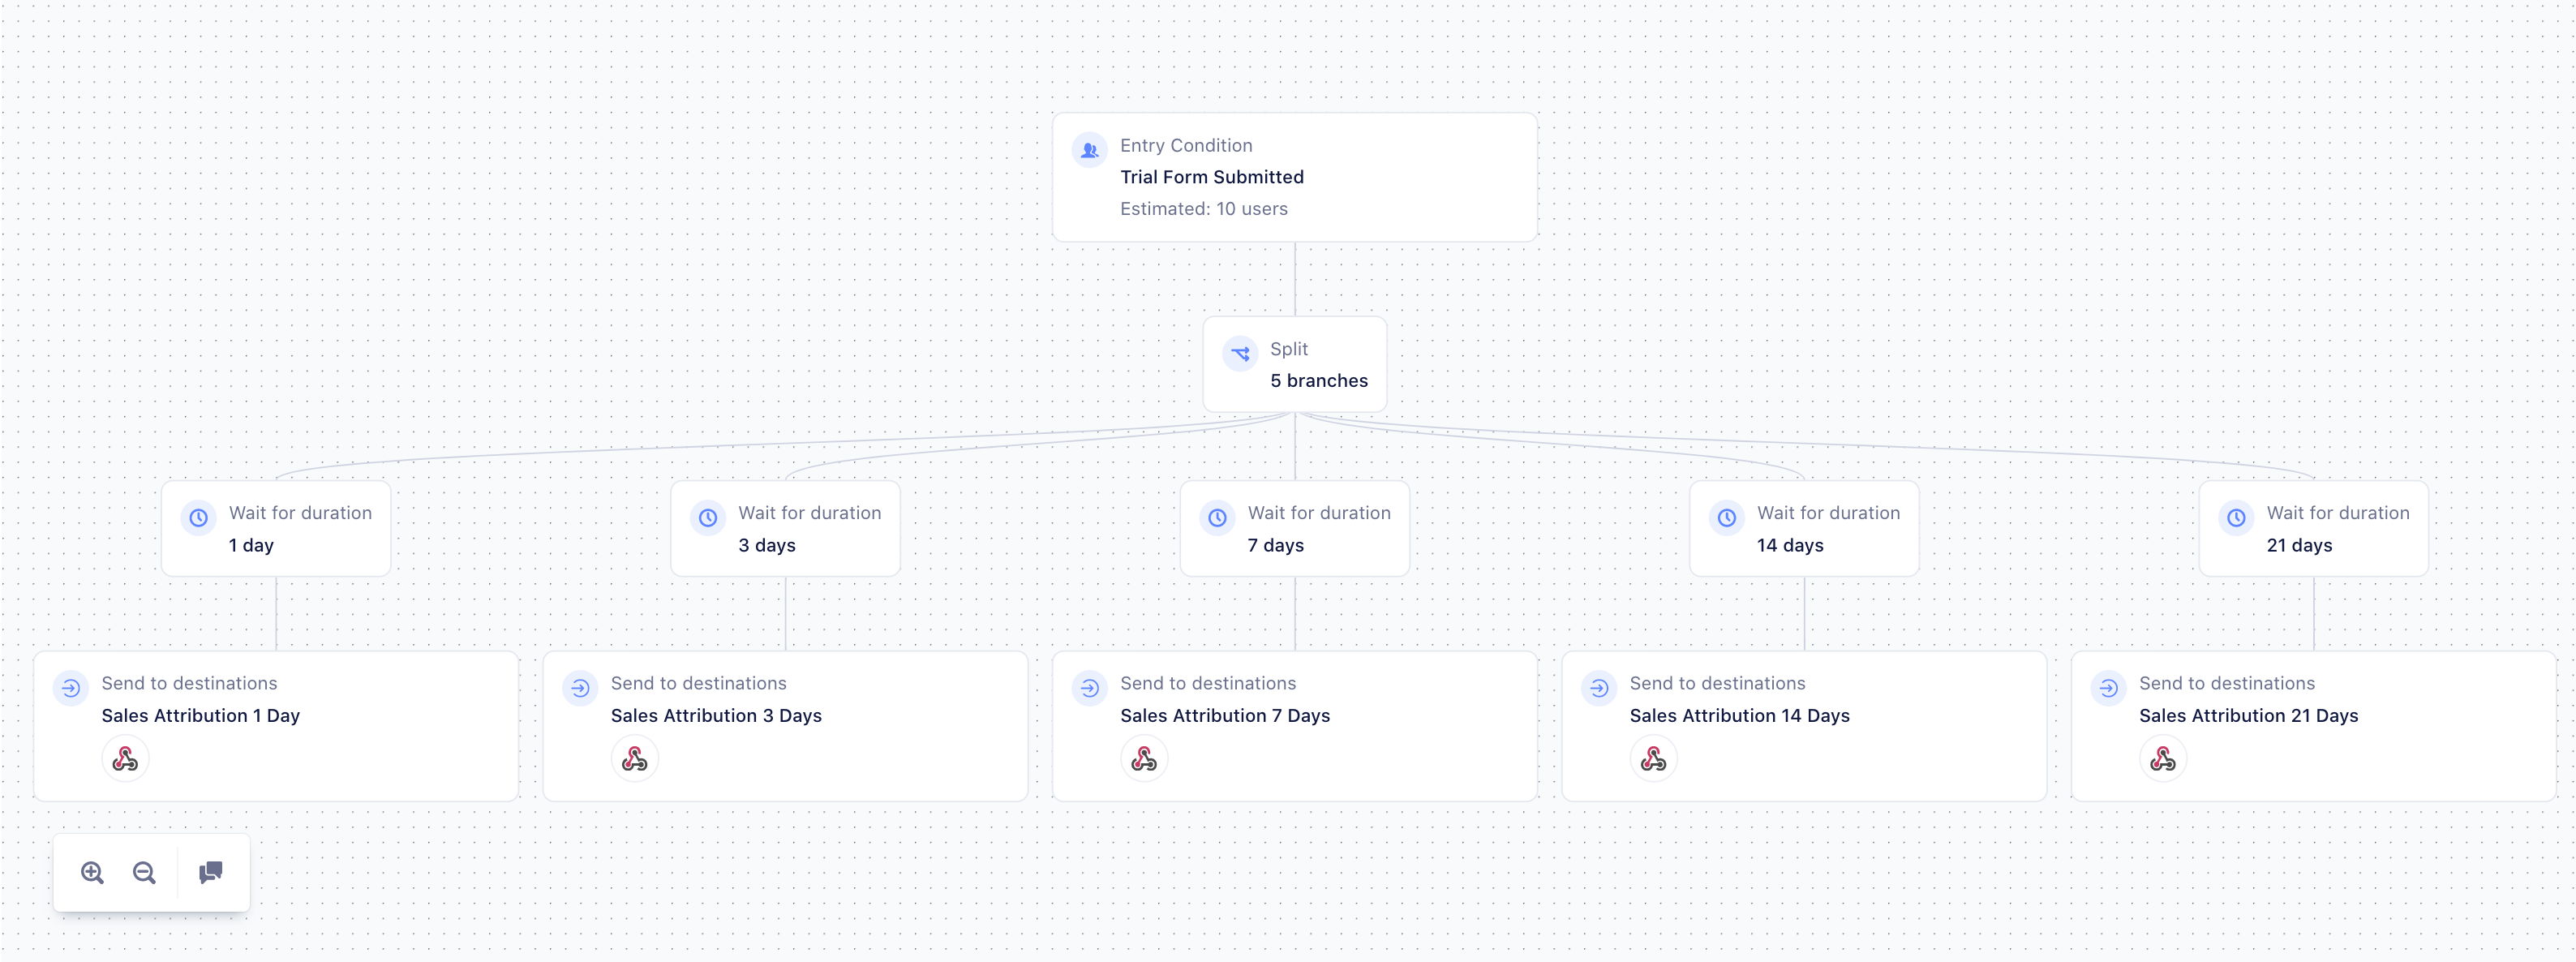 Personas Journey with 5 branches. Same webhook